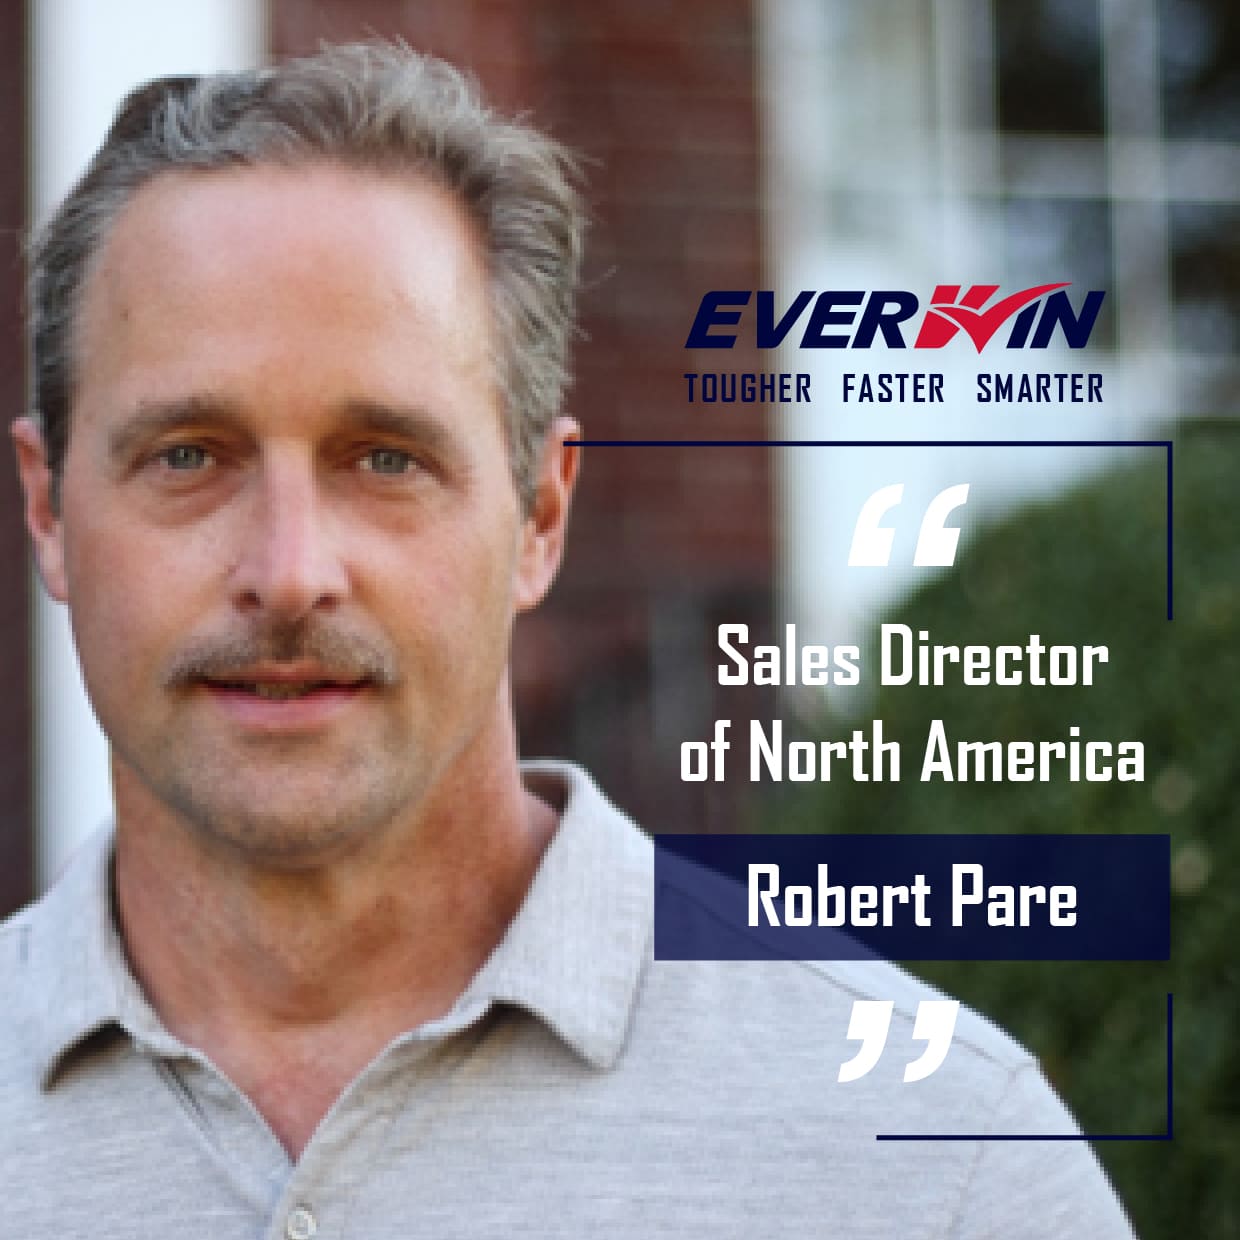 EVERWIN's New National Sales Director of North America, Robert Pare.